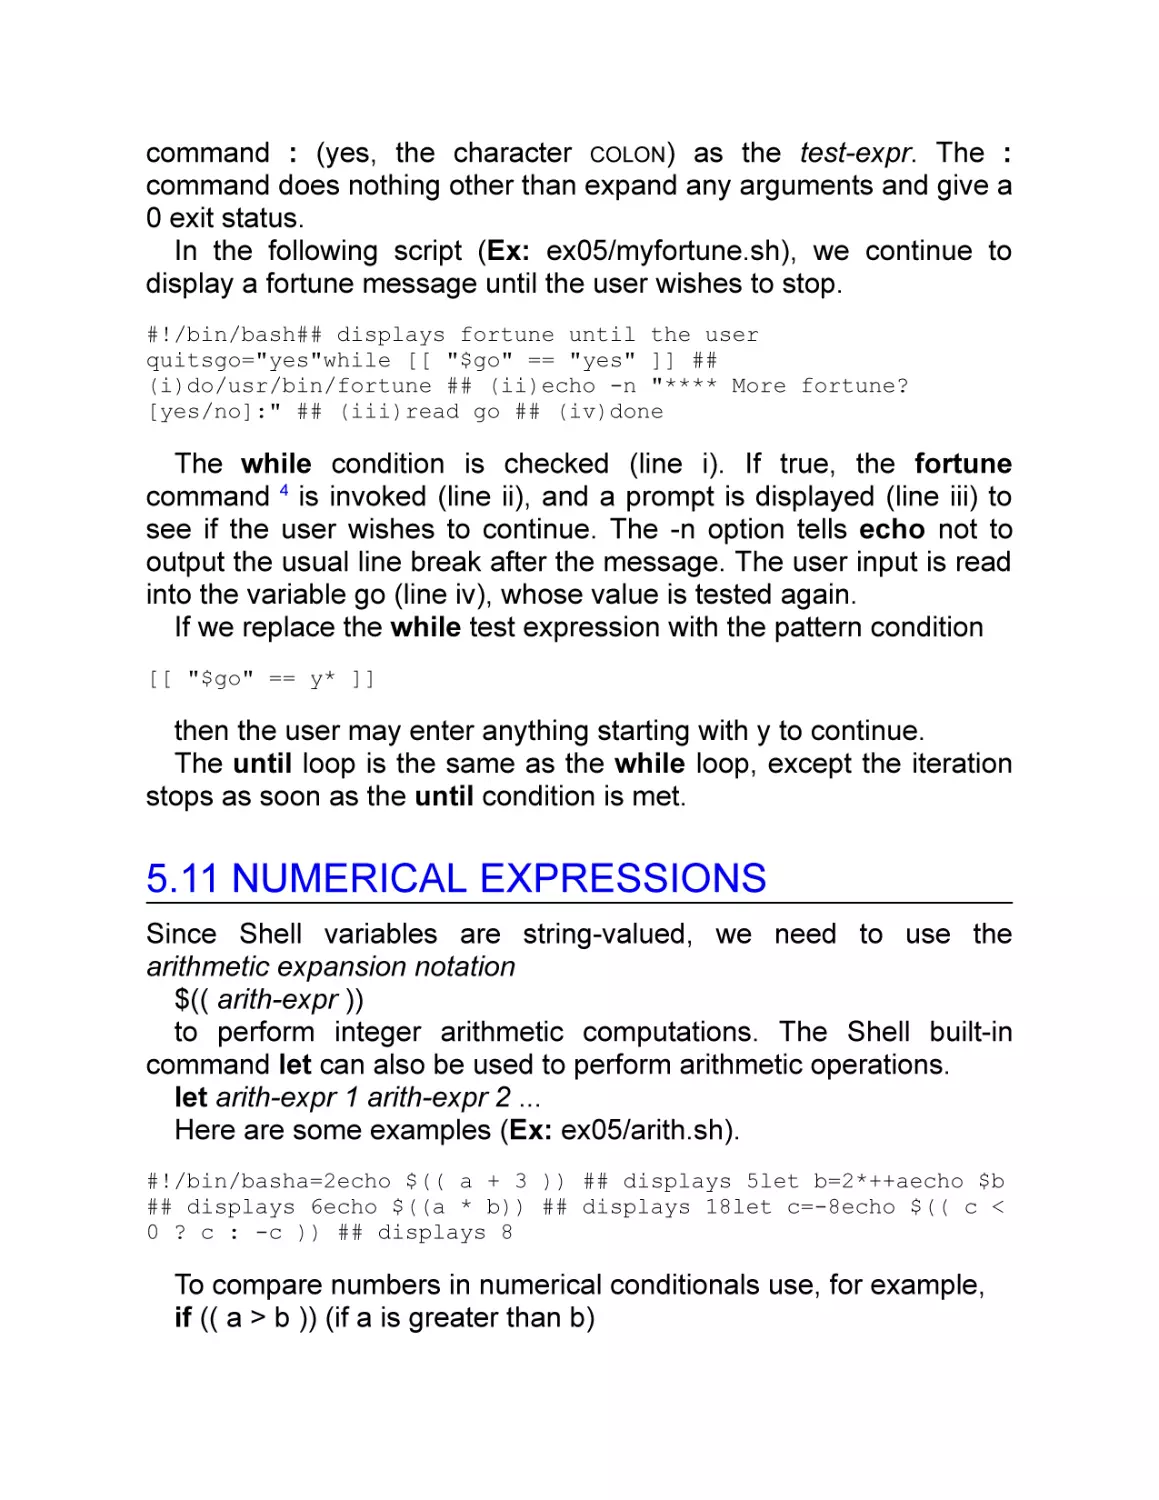 5.11 Numerical Expressions